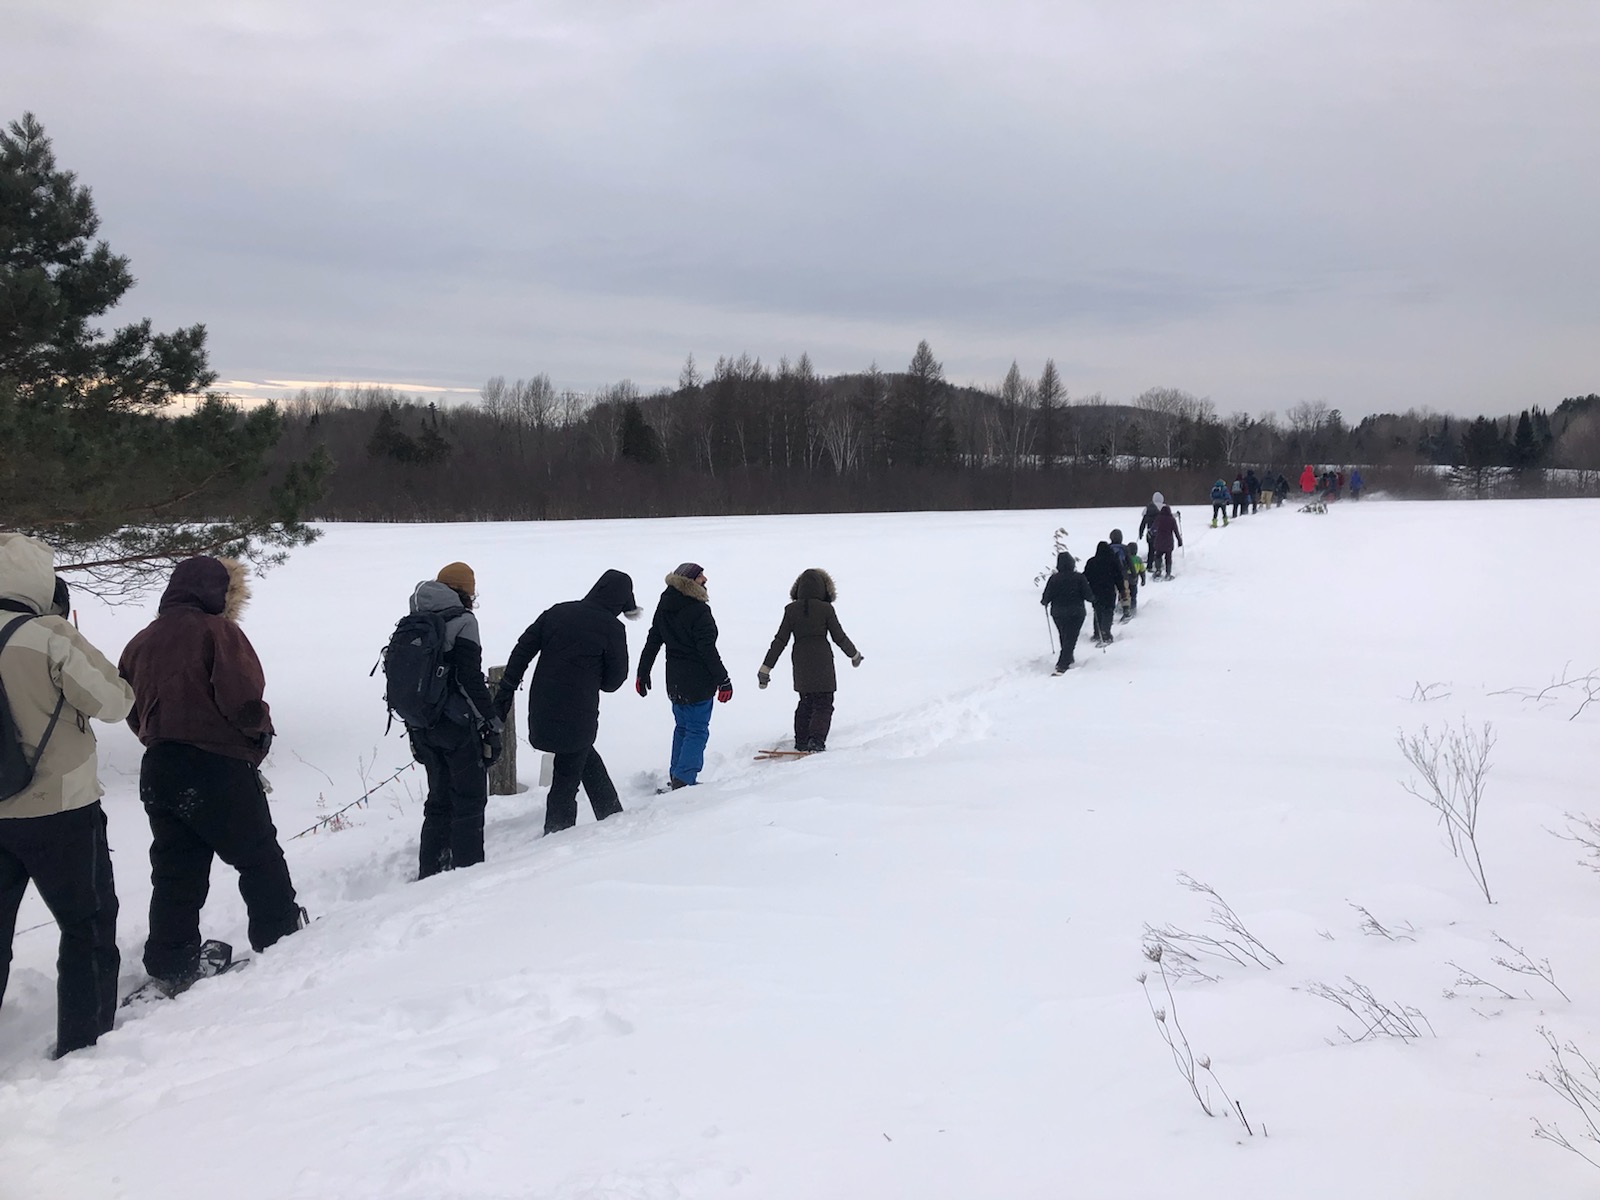 Image shows 20 people walking in a line in snowshoes across the snowy land with trees in the distance